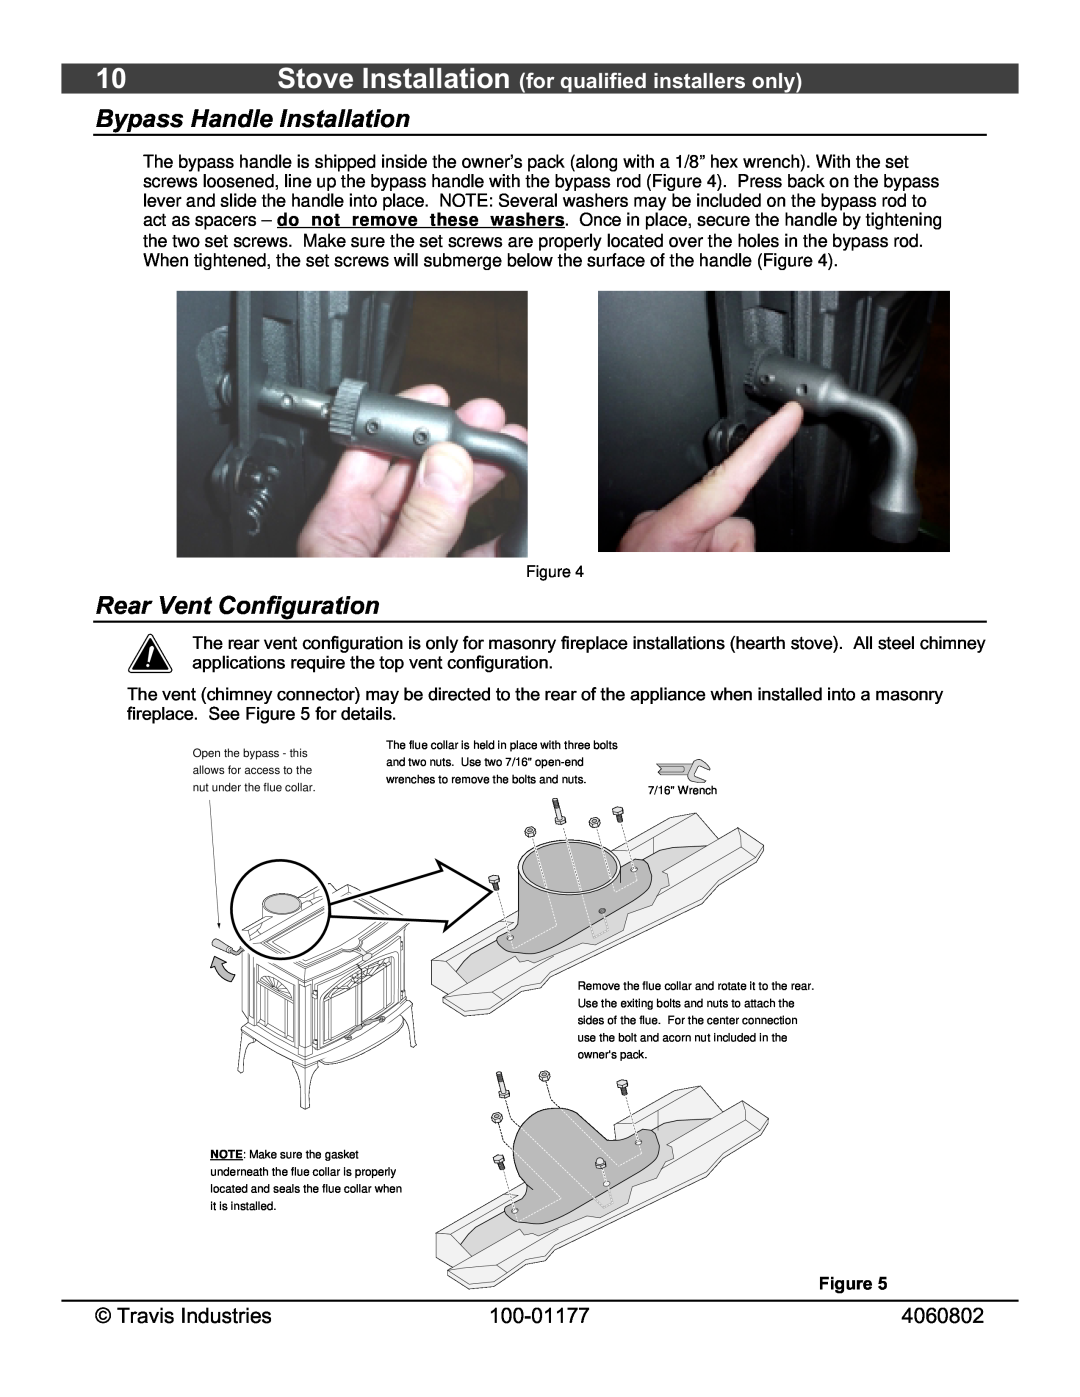 Lopi owner manual Bypass Handle Installation, Rear Vent Configuration, Stove Installation for qualified installers only 